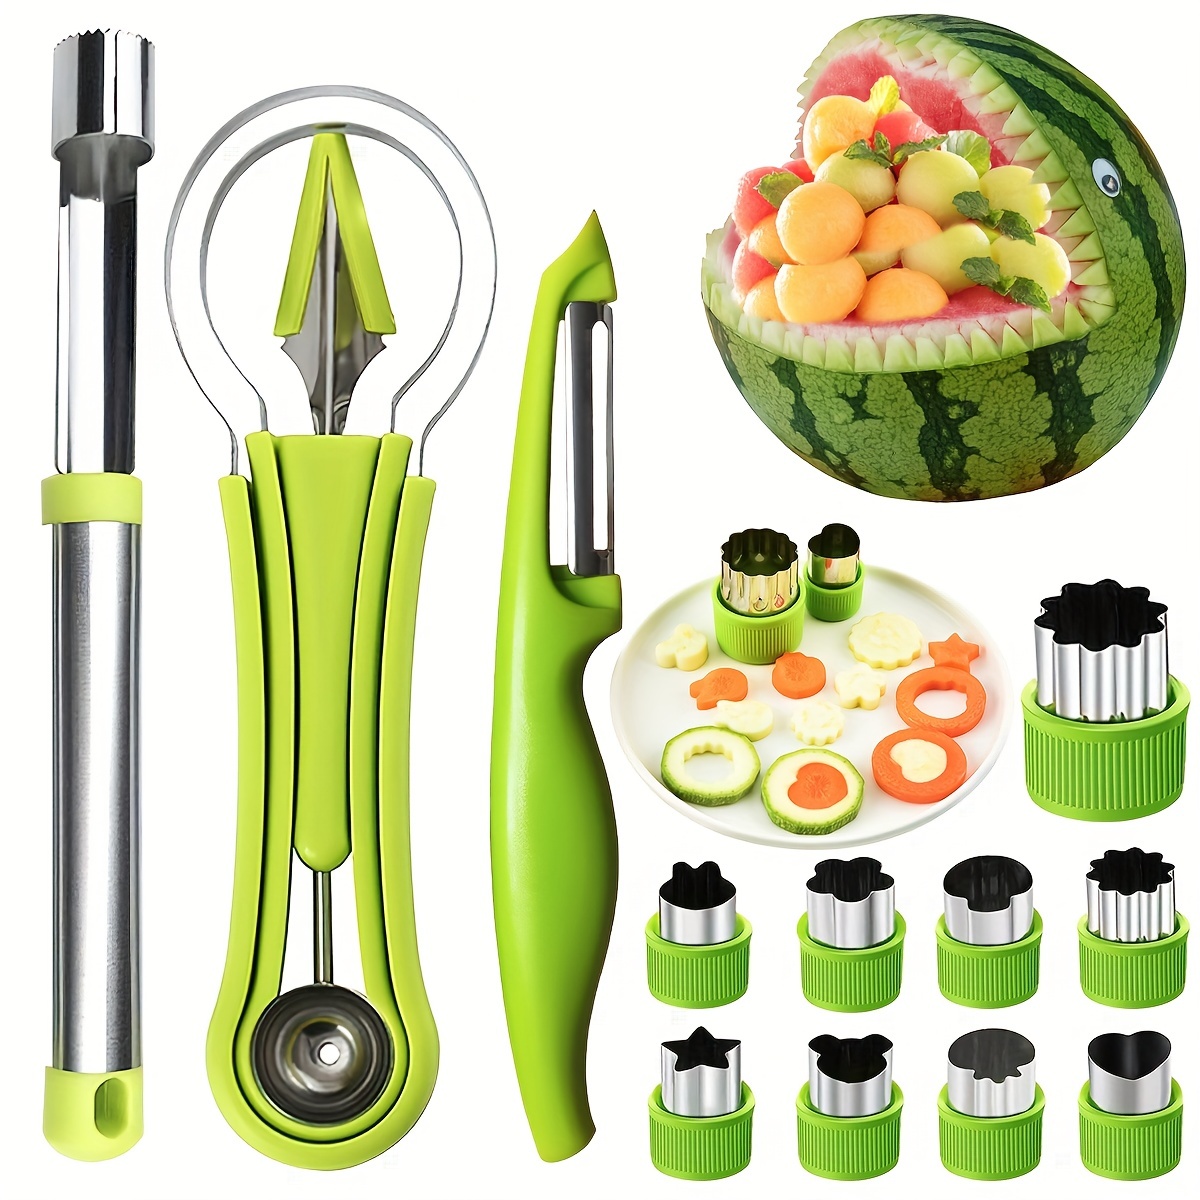 

14pcs, Fruit Carving And Melon Baller Set, Stainless Steel Vegetable & Fruit Cutting Mold Kit, Includes Crinkle Cutter, Slicer, Food Sculpting Tools, Kitchen Gadgets